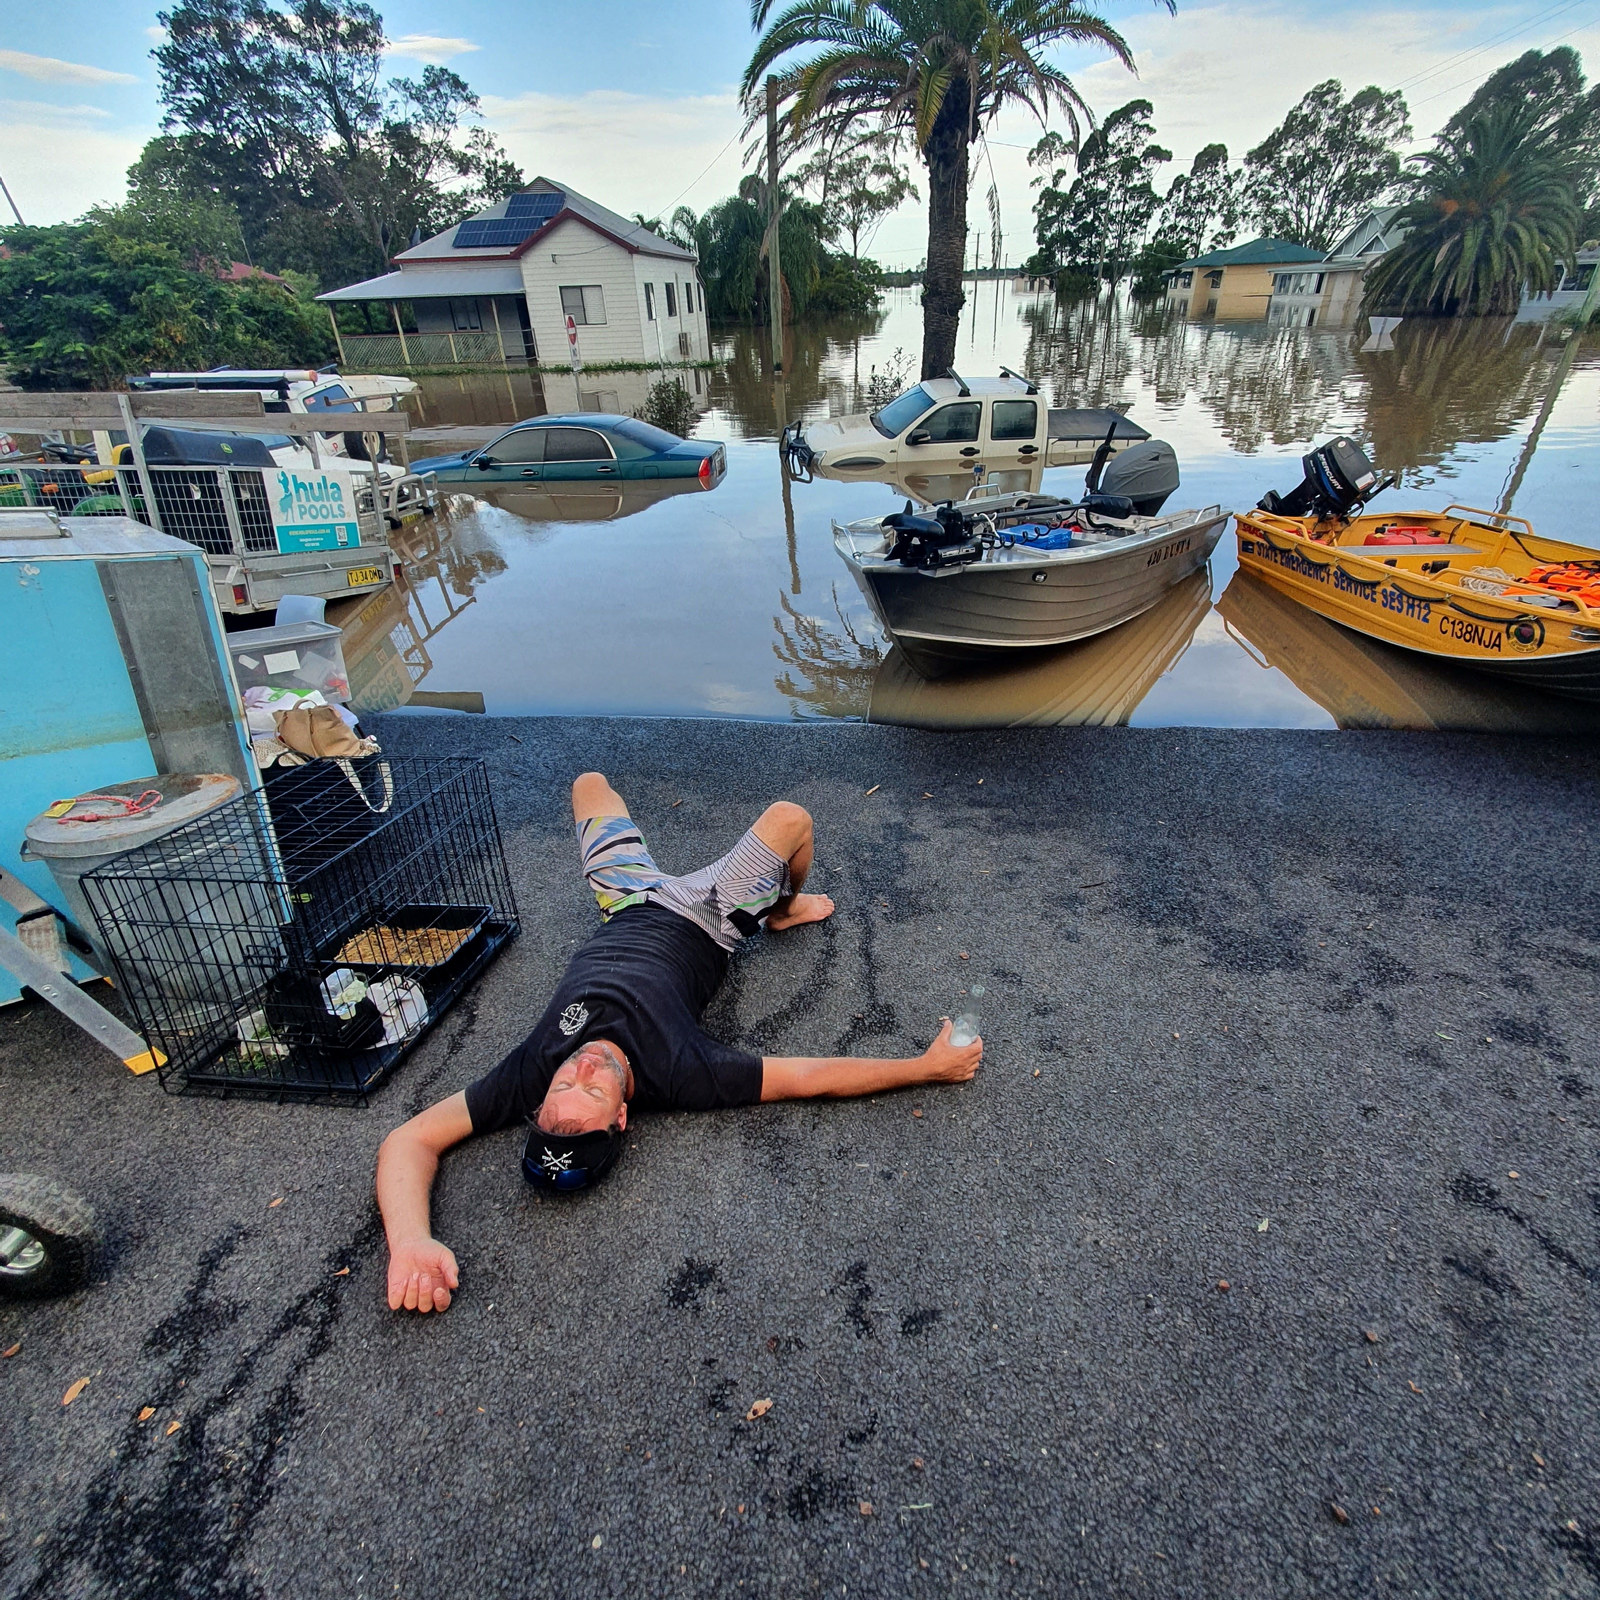 Rescuer resting during the NSW floods in 2022 in the Broadwater area (submission 0860)